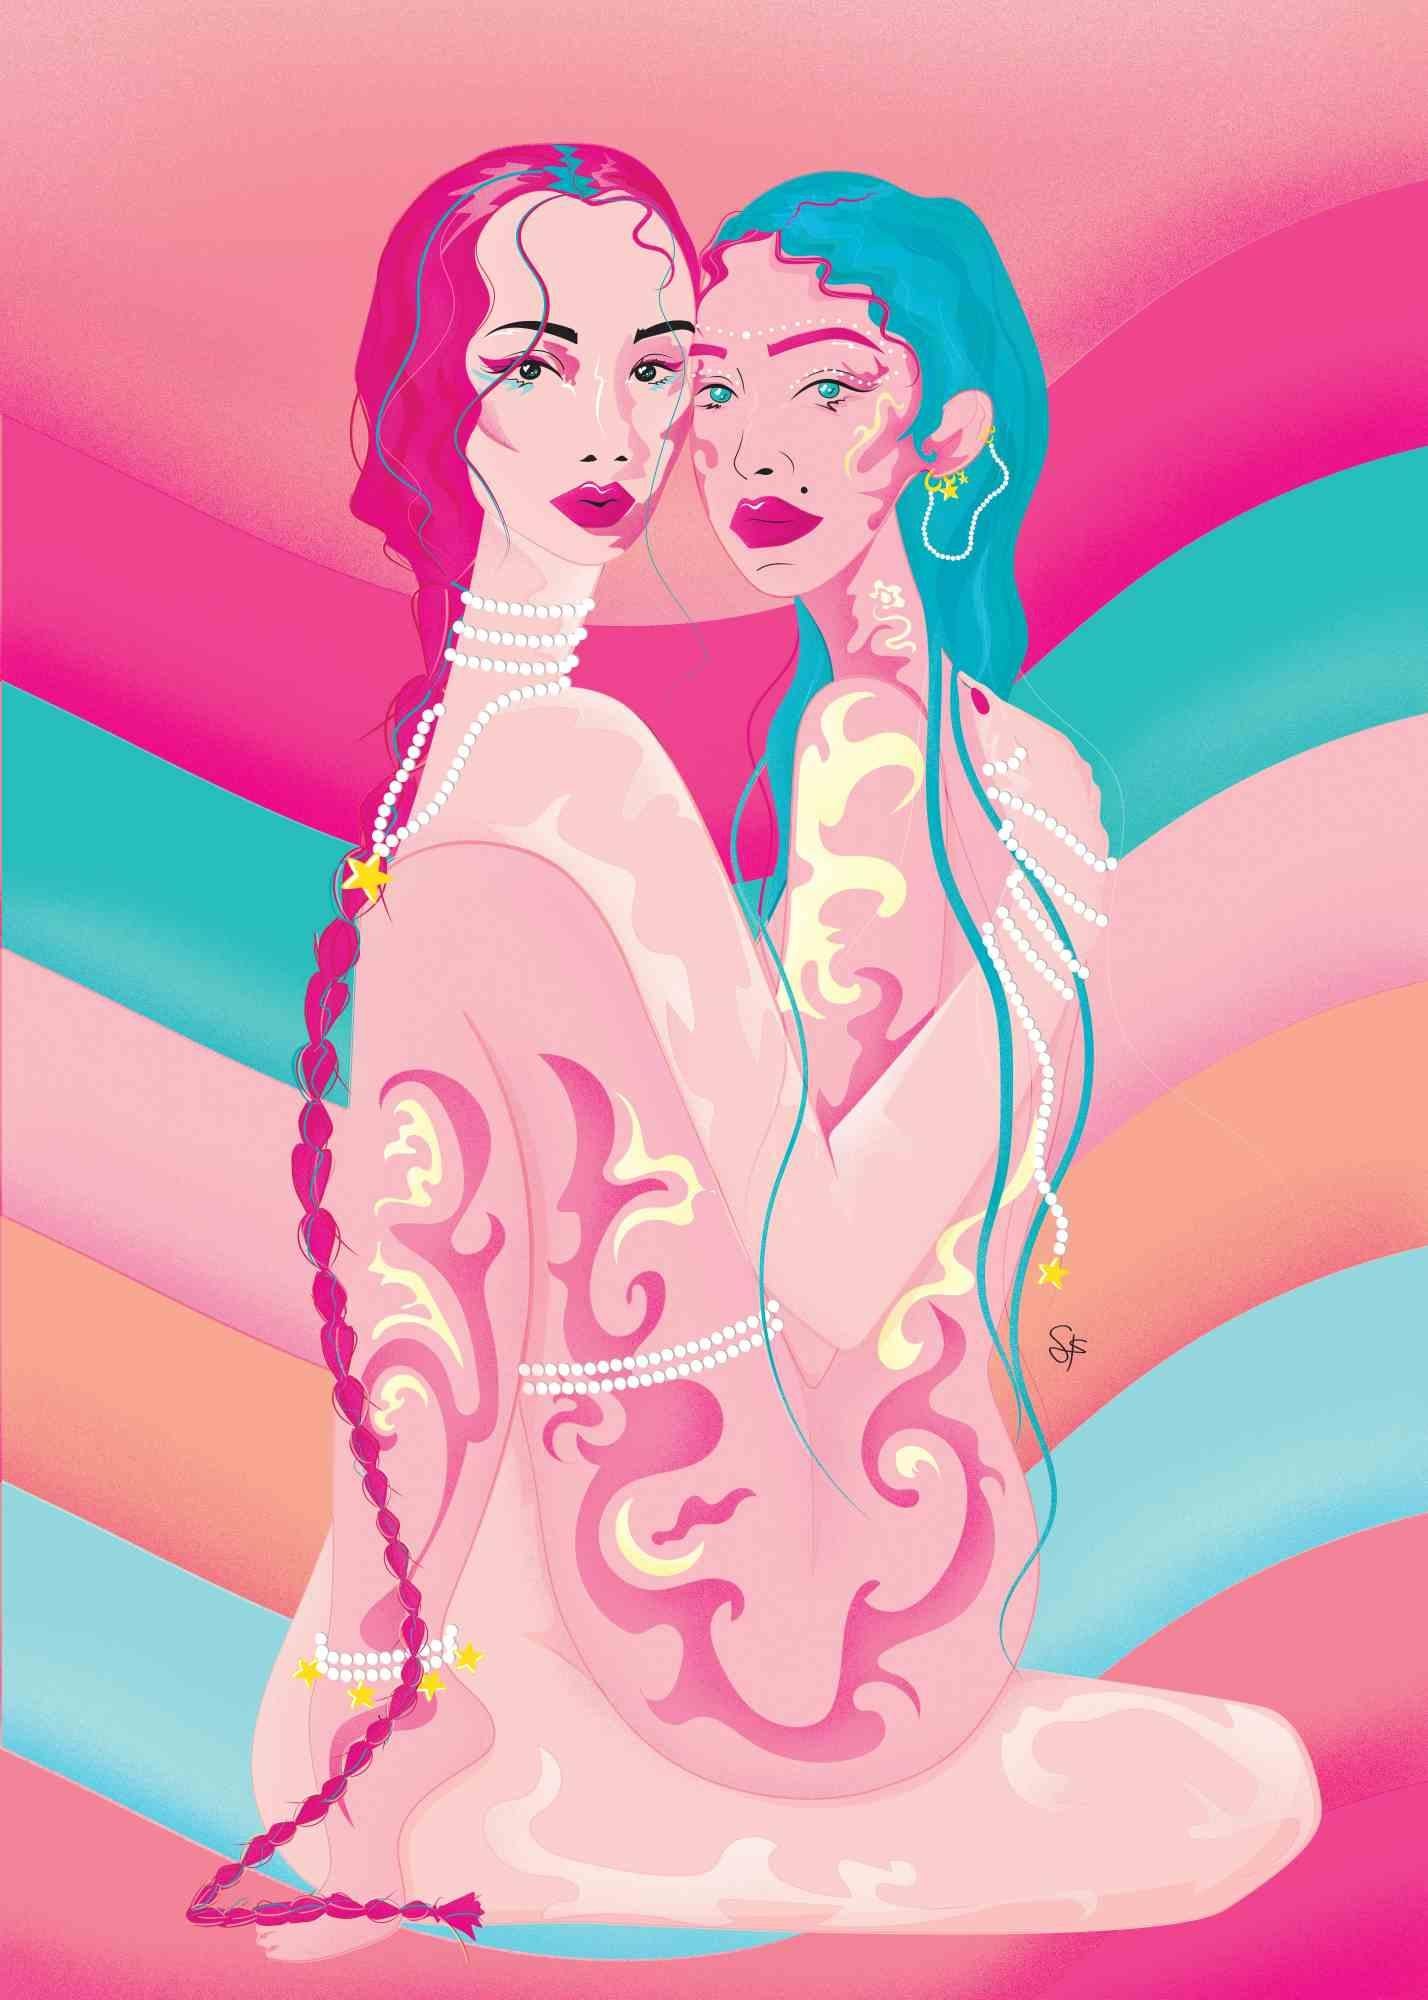 Illustration on paper (giclée print) realized by the Italian artist Sara Franzese in 2022.
Edition of 5. Hand-signed and numbered
Two sisters are two colorful souls, one holds and protects the other. Everything is an explosion of bright colours